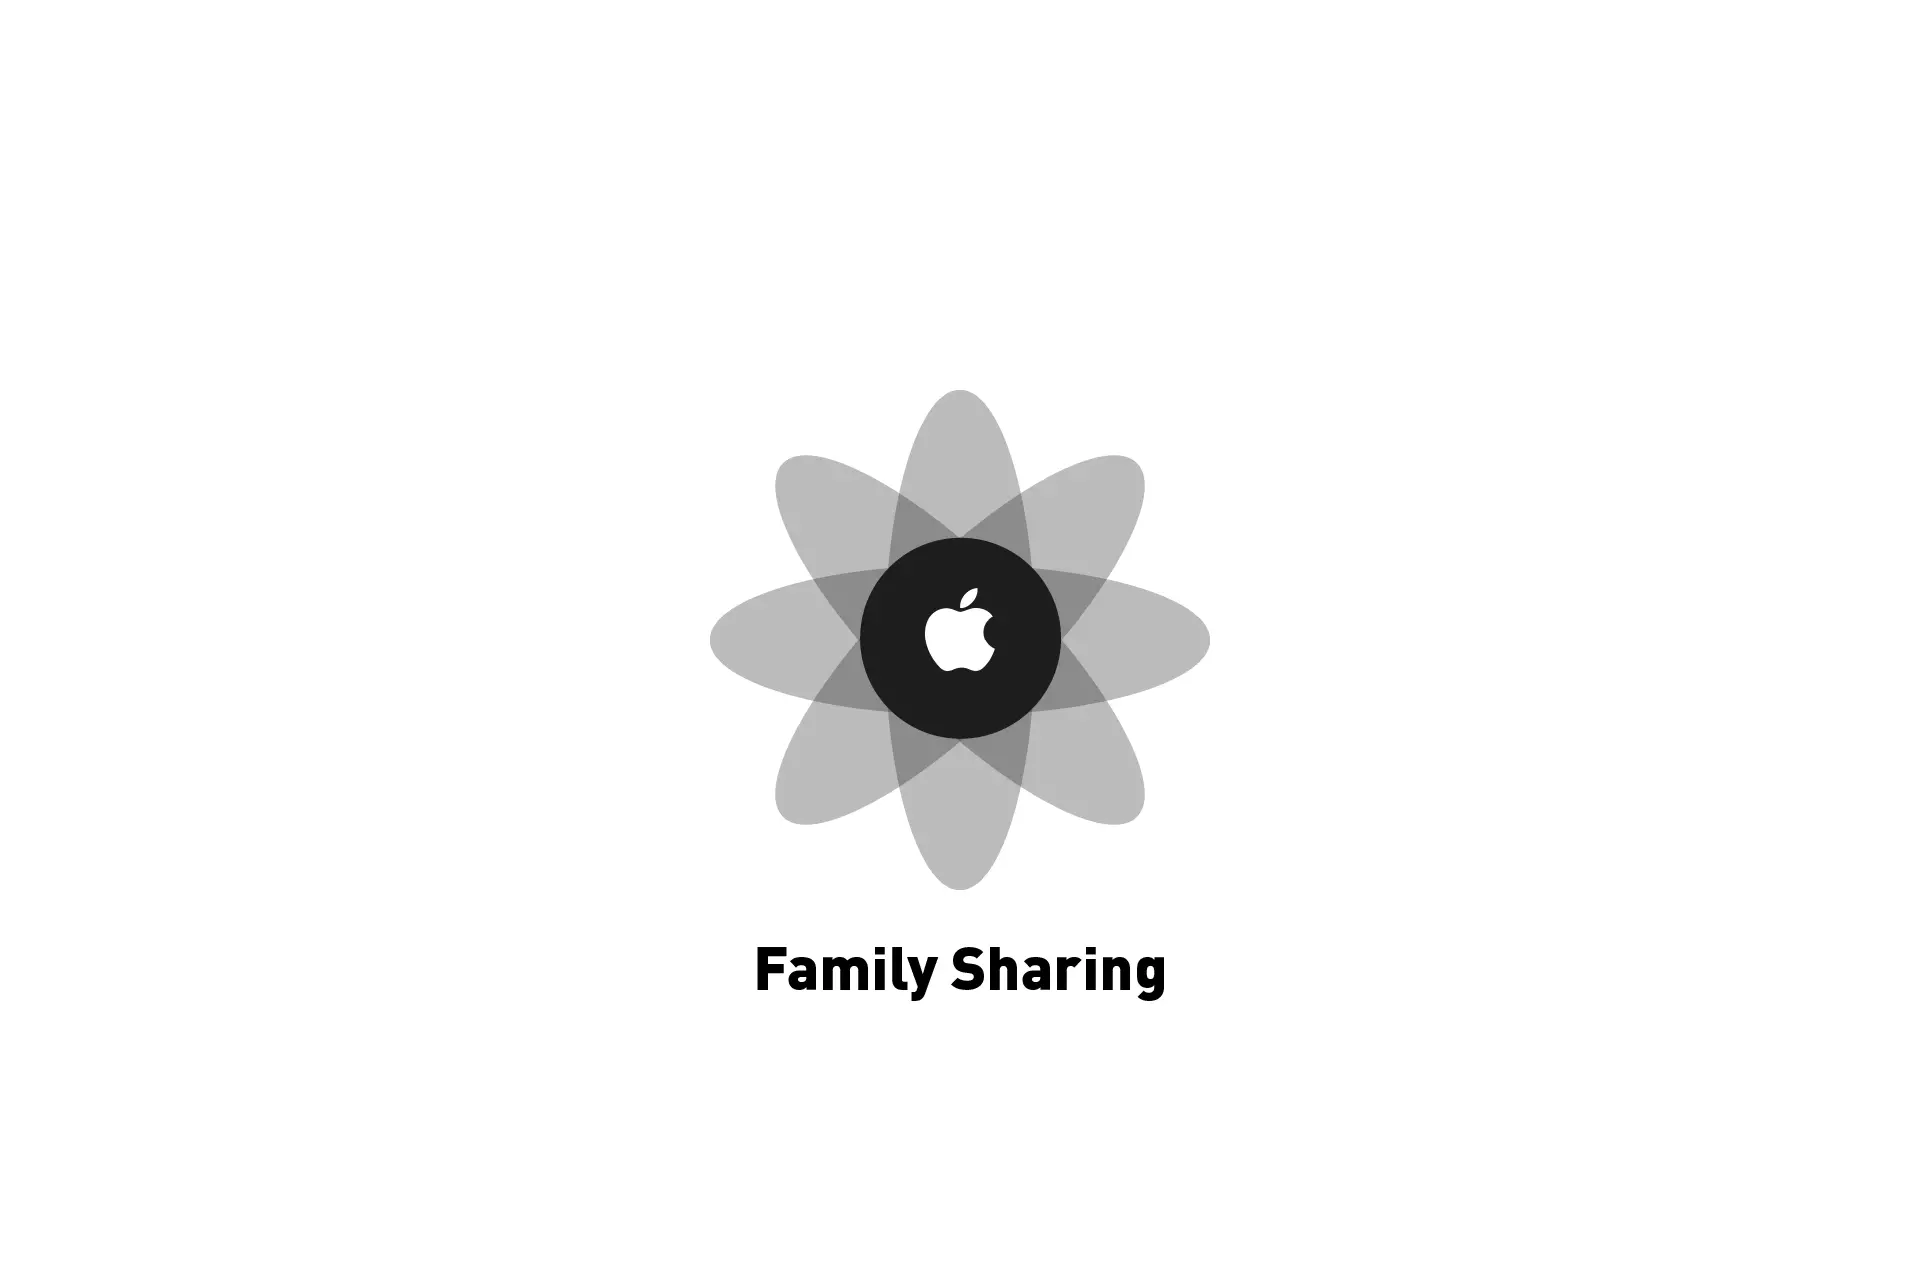 A flower that represents Apple with the text "Family Sharing" beneath it.